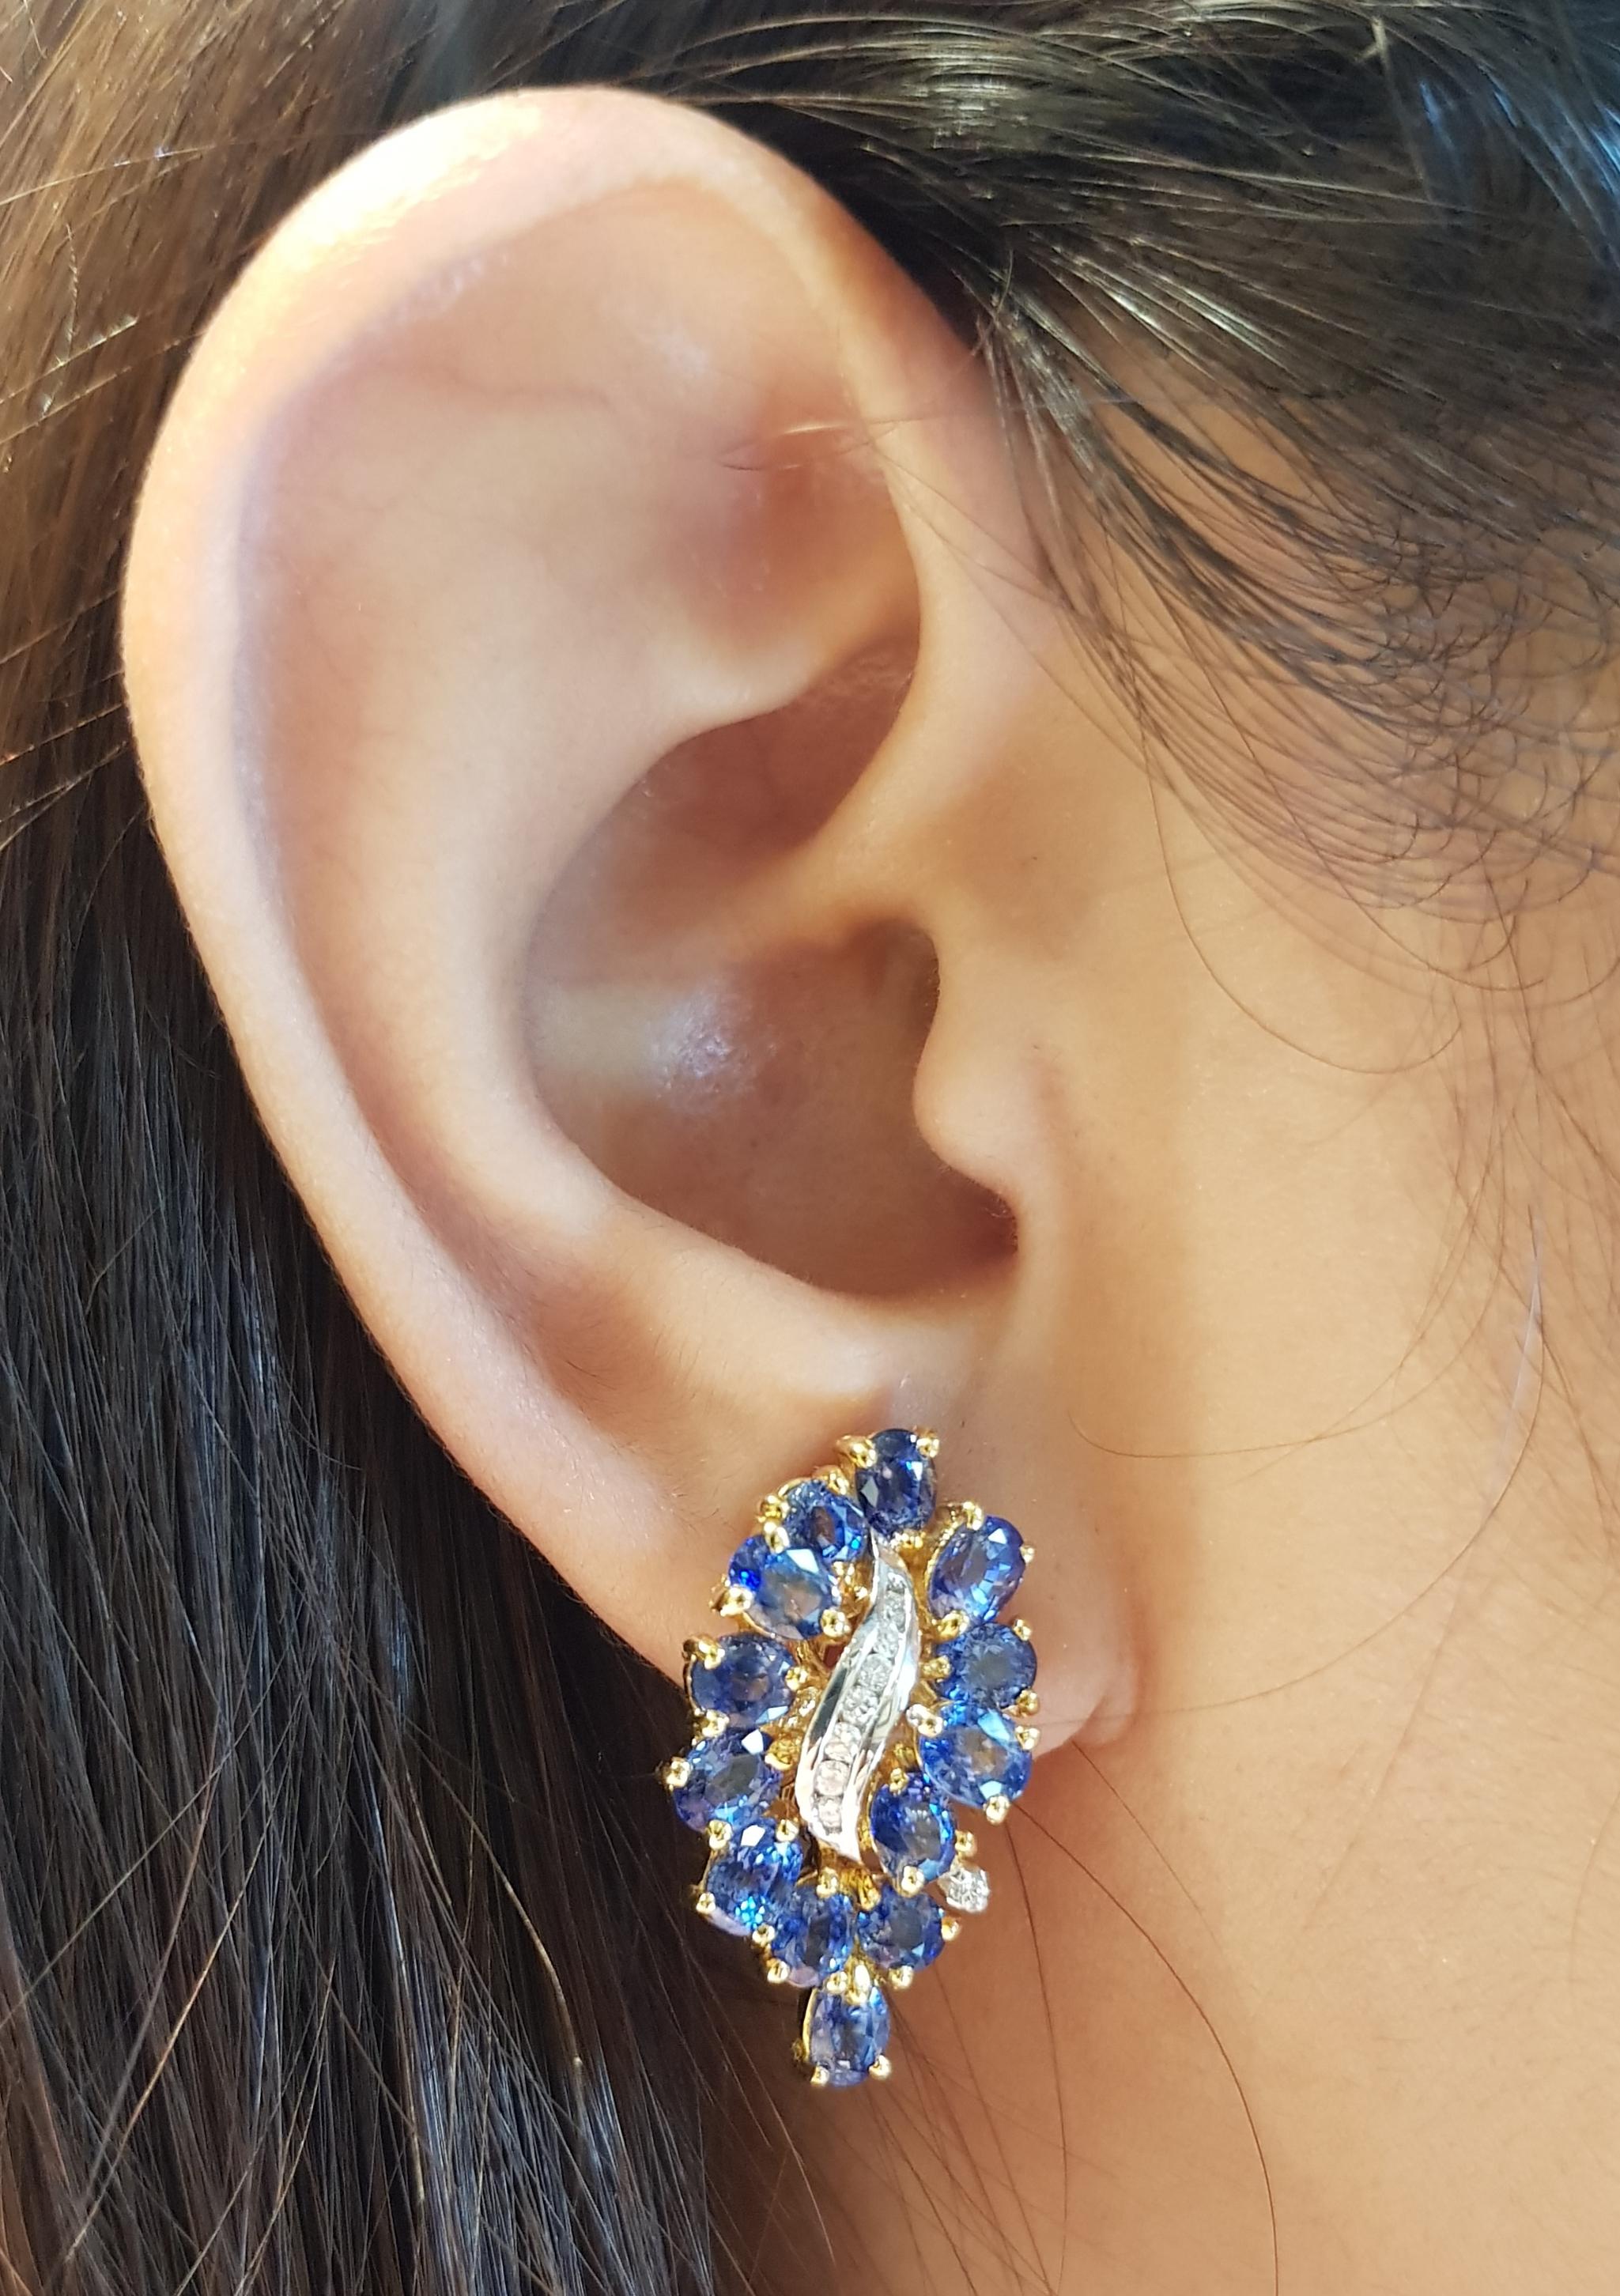 Blue Sapphire 7.58 carats with Diamond 0.19 carat Earrings set in 18 Karat Gold Settings

Width:  1.3 cm 
Length: 2.6 cm
Total Weight: 11.85 grams

